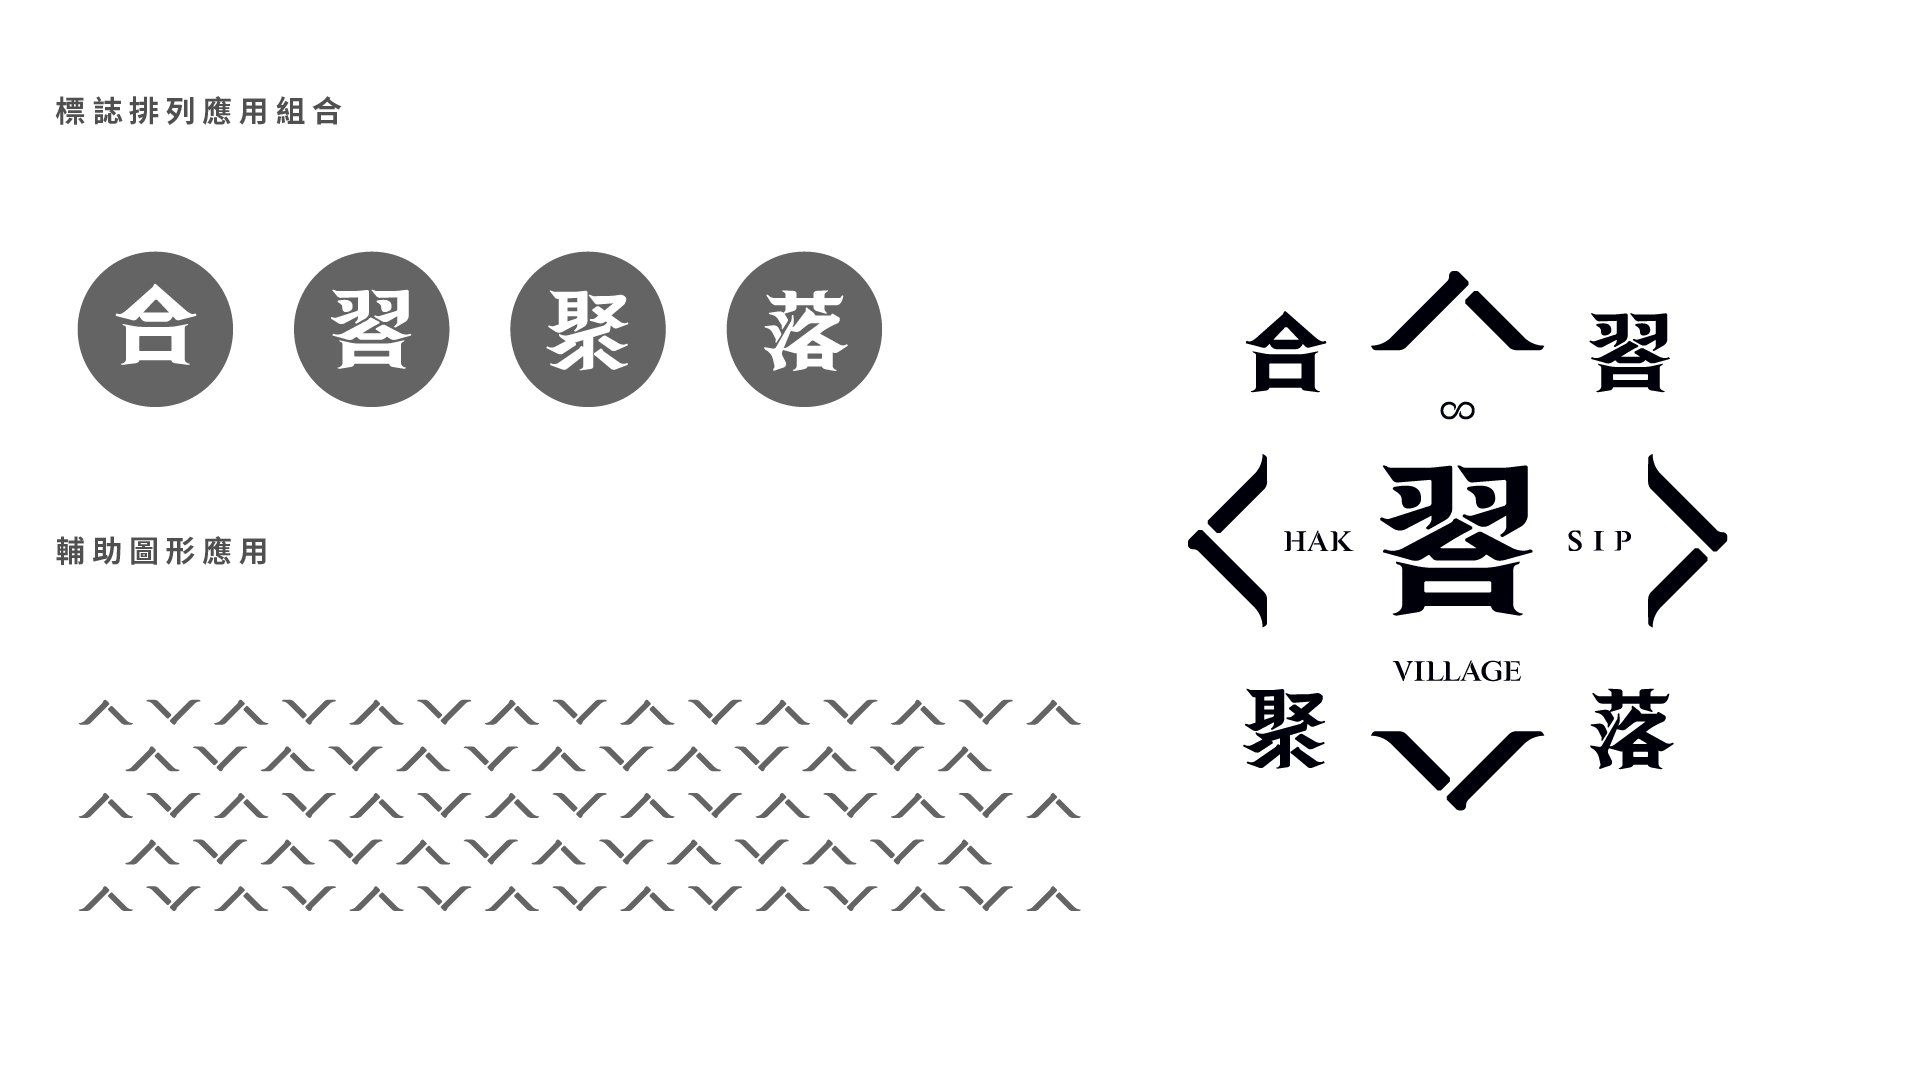 The LOGO is based on man to create the significant value of HAKSIP Village; the characteristics of the LOGO are designed to match the colors and style of the space; the LOGO design is finally completed by using Chinese characters.  | Taipei Cultural experience | CAN Culture